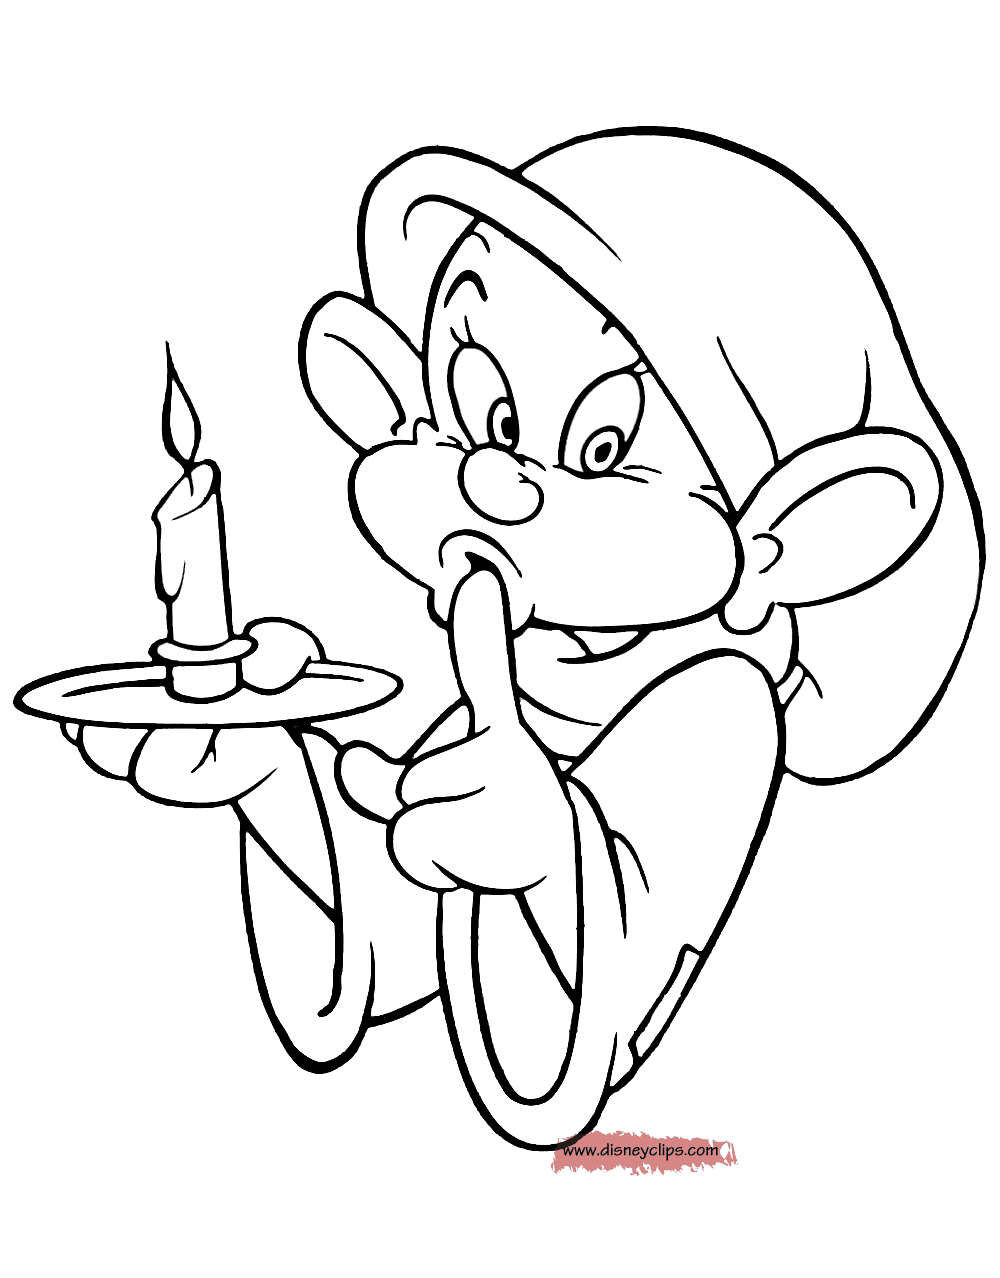 Dopey shushing Coloring Page